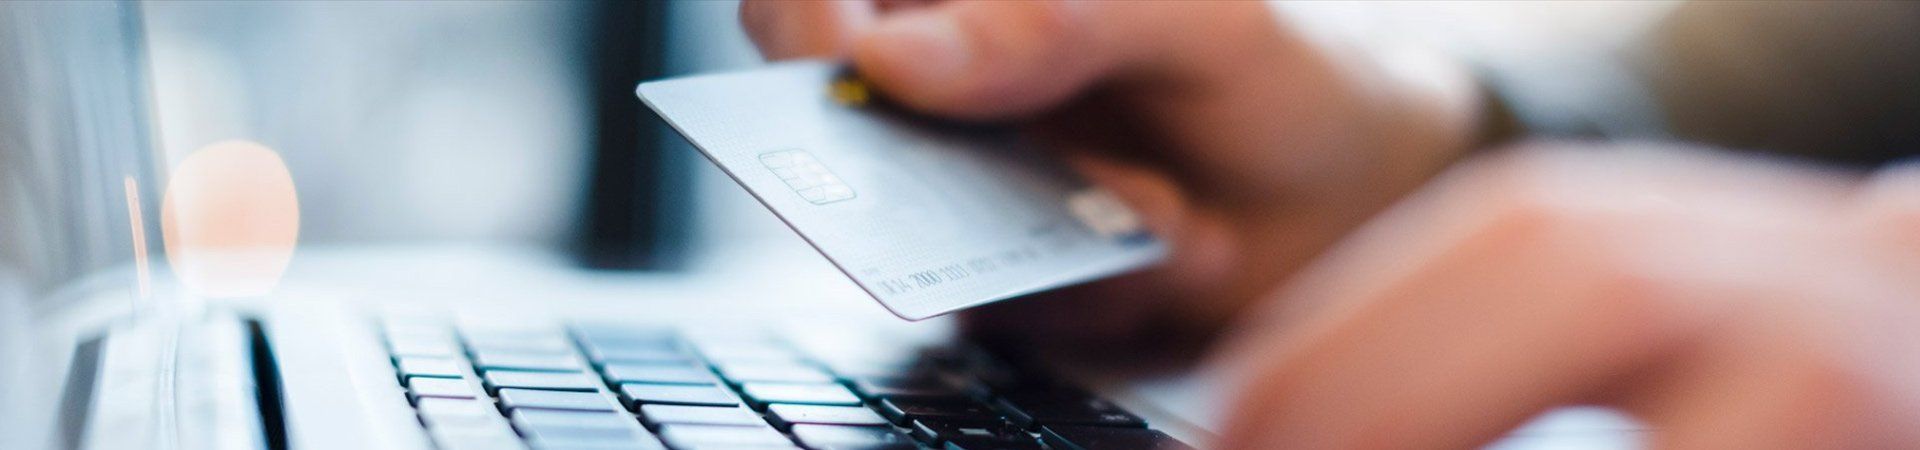 paying with credit card online